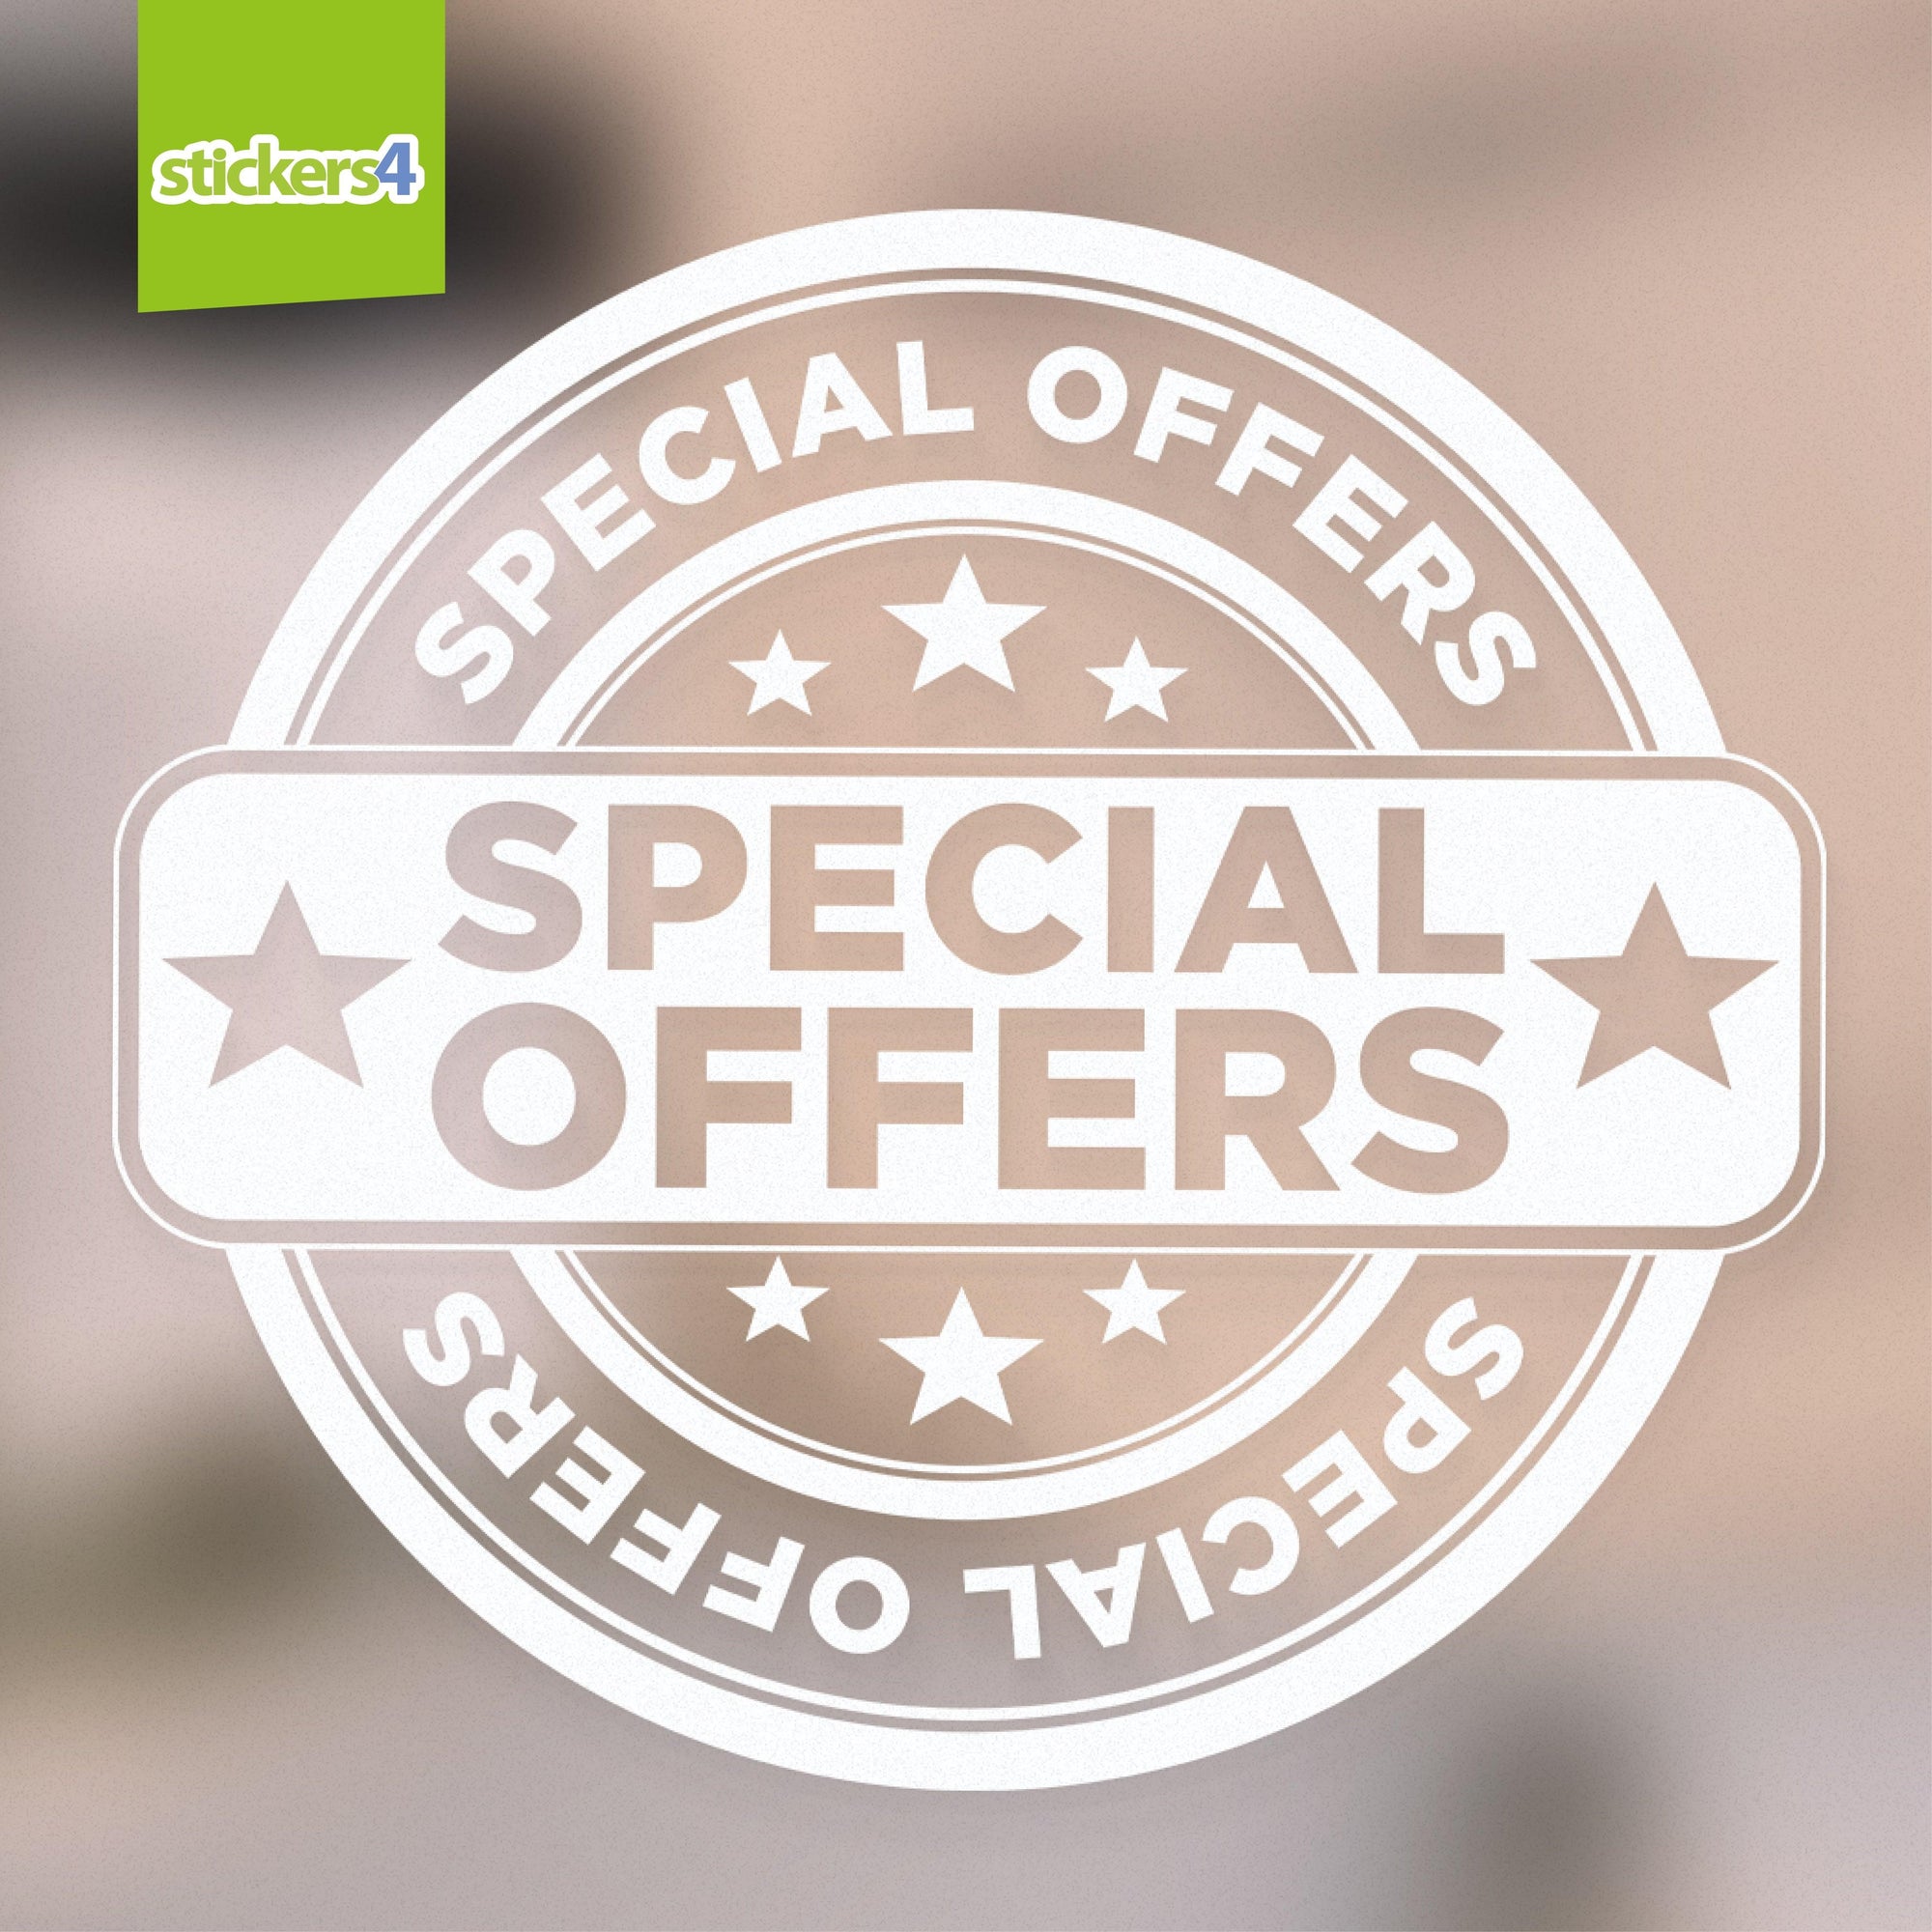 SPECIAL OFFERS Roundel Window Sticker - White on Clear Promotions